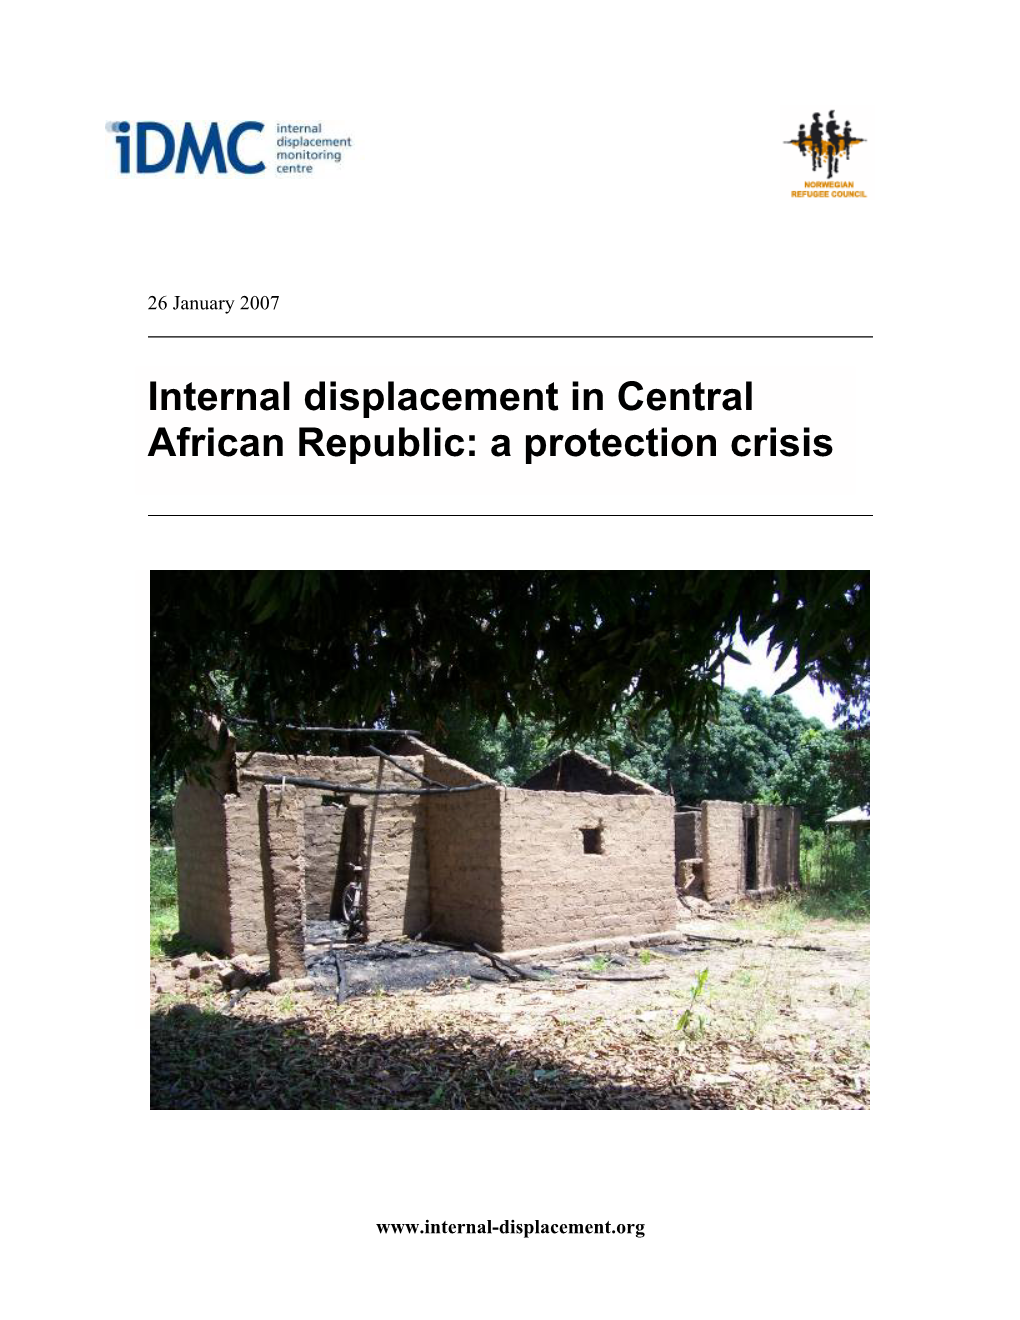 Internal Displacement in Central African Republic: a Protection Crisis